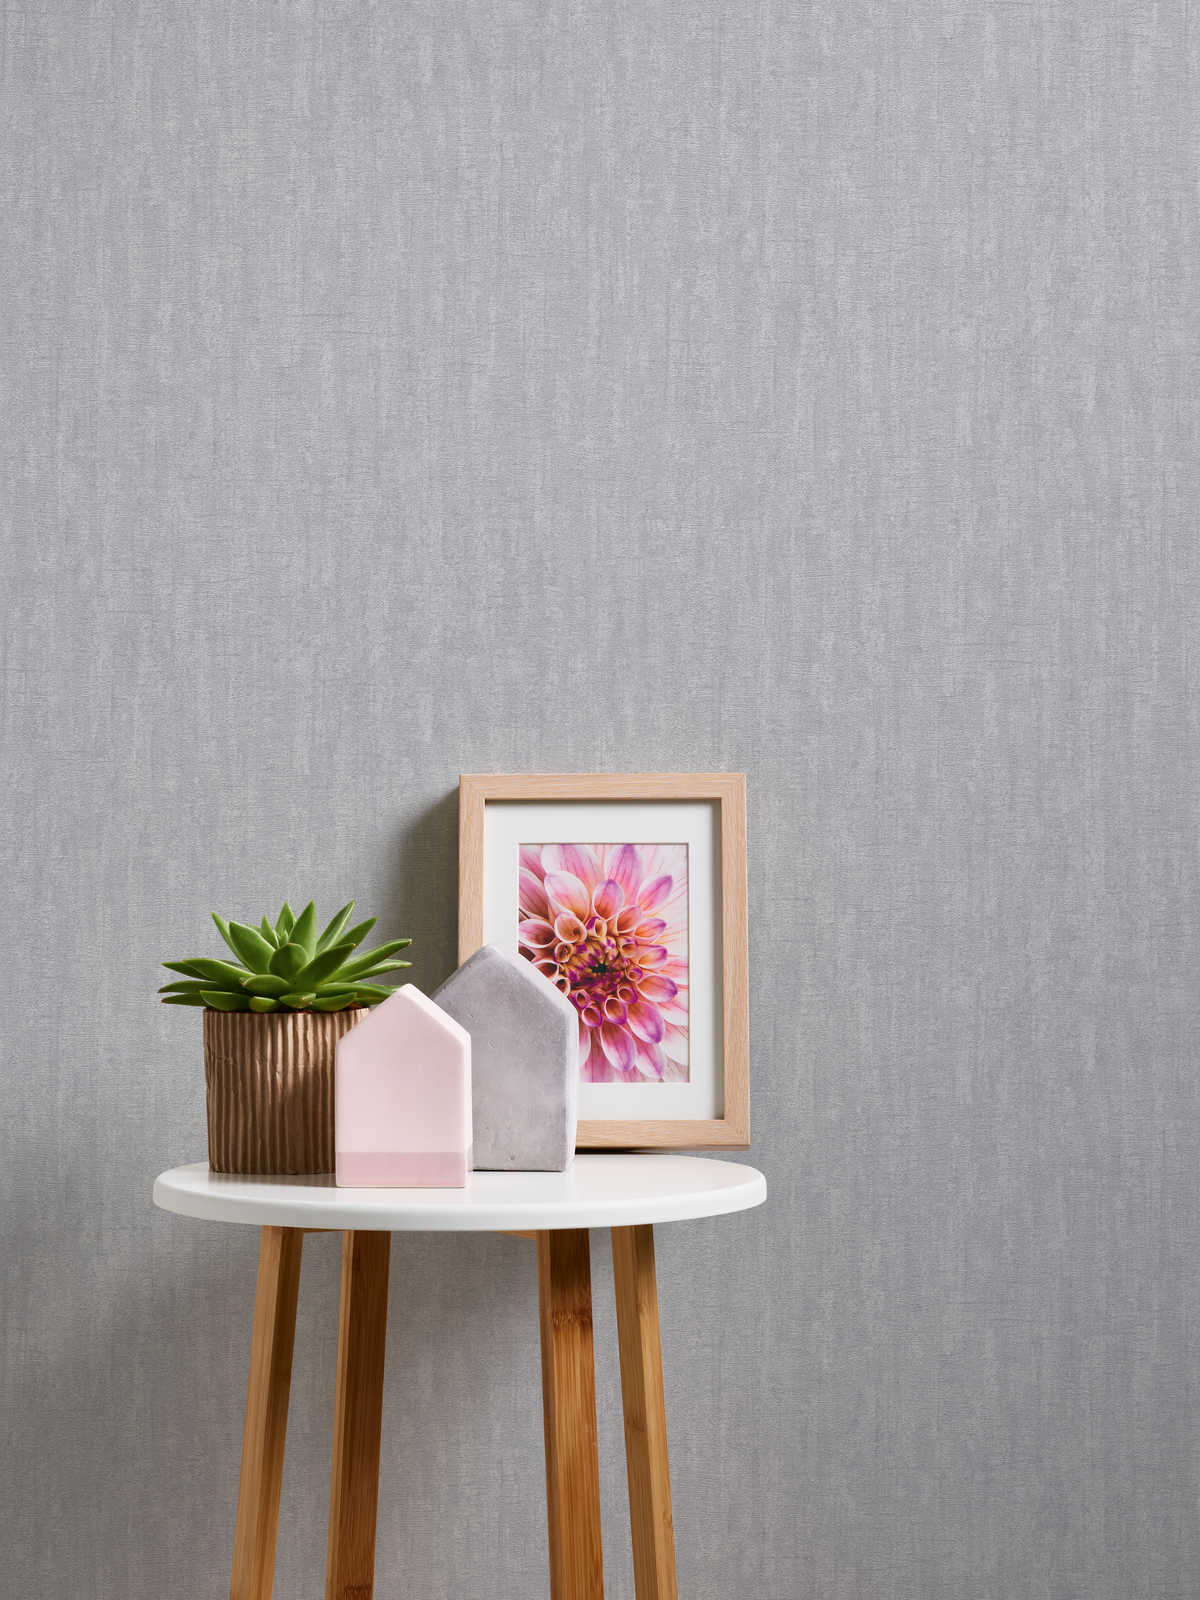             Light grey wallpaper with textured pattern, glossy - grey
        